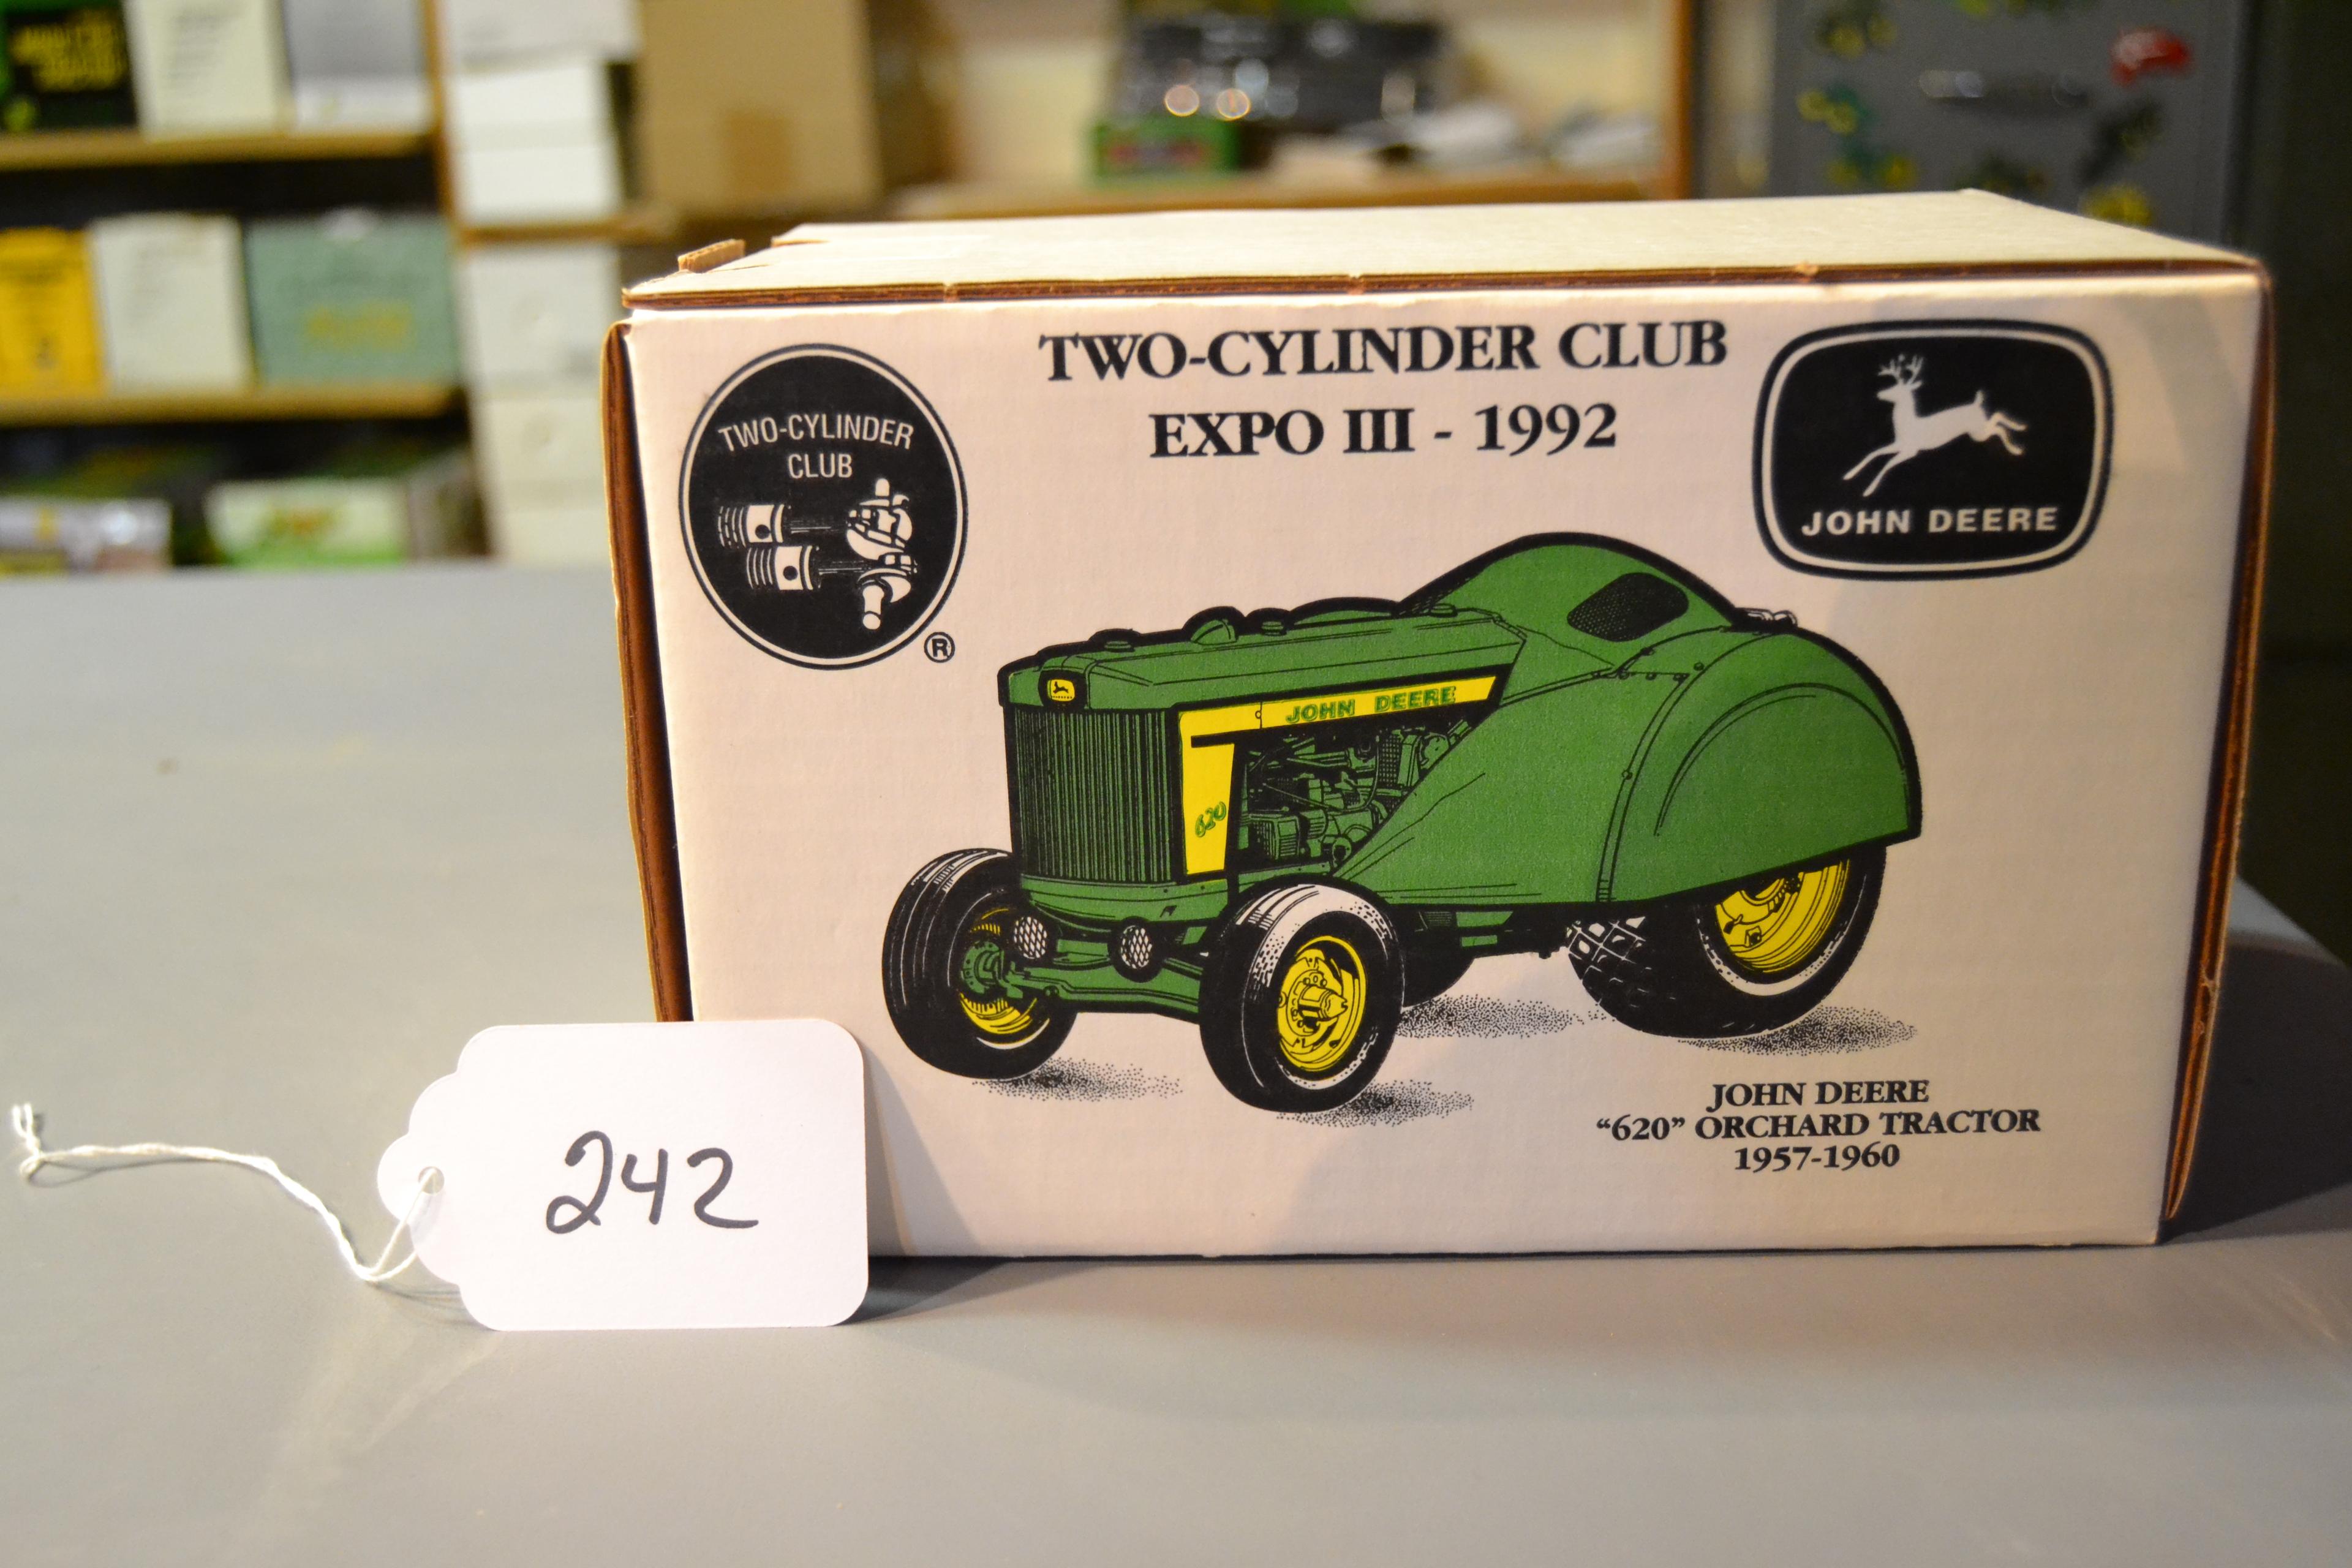 2 cylinder club expo III 1992 - diecast JD "620" orchard tractor W/box